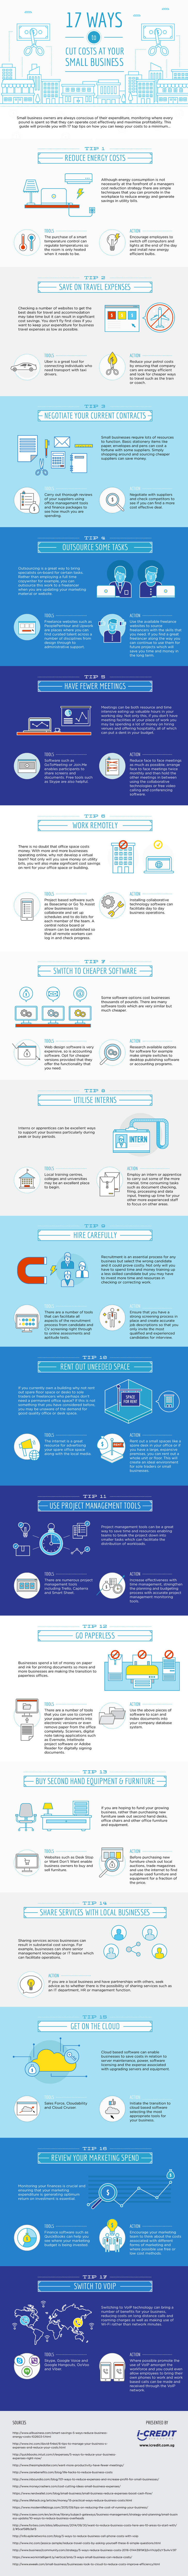 Cost saving small business infographic 